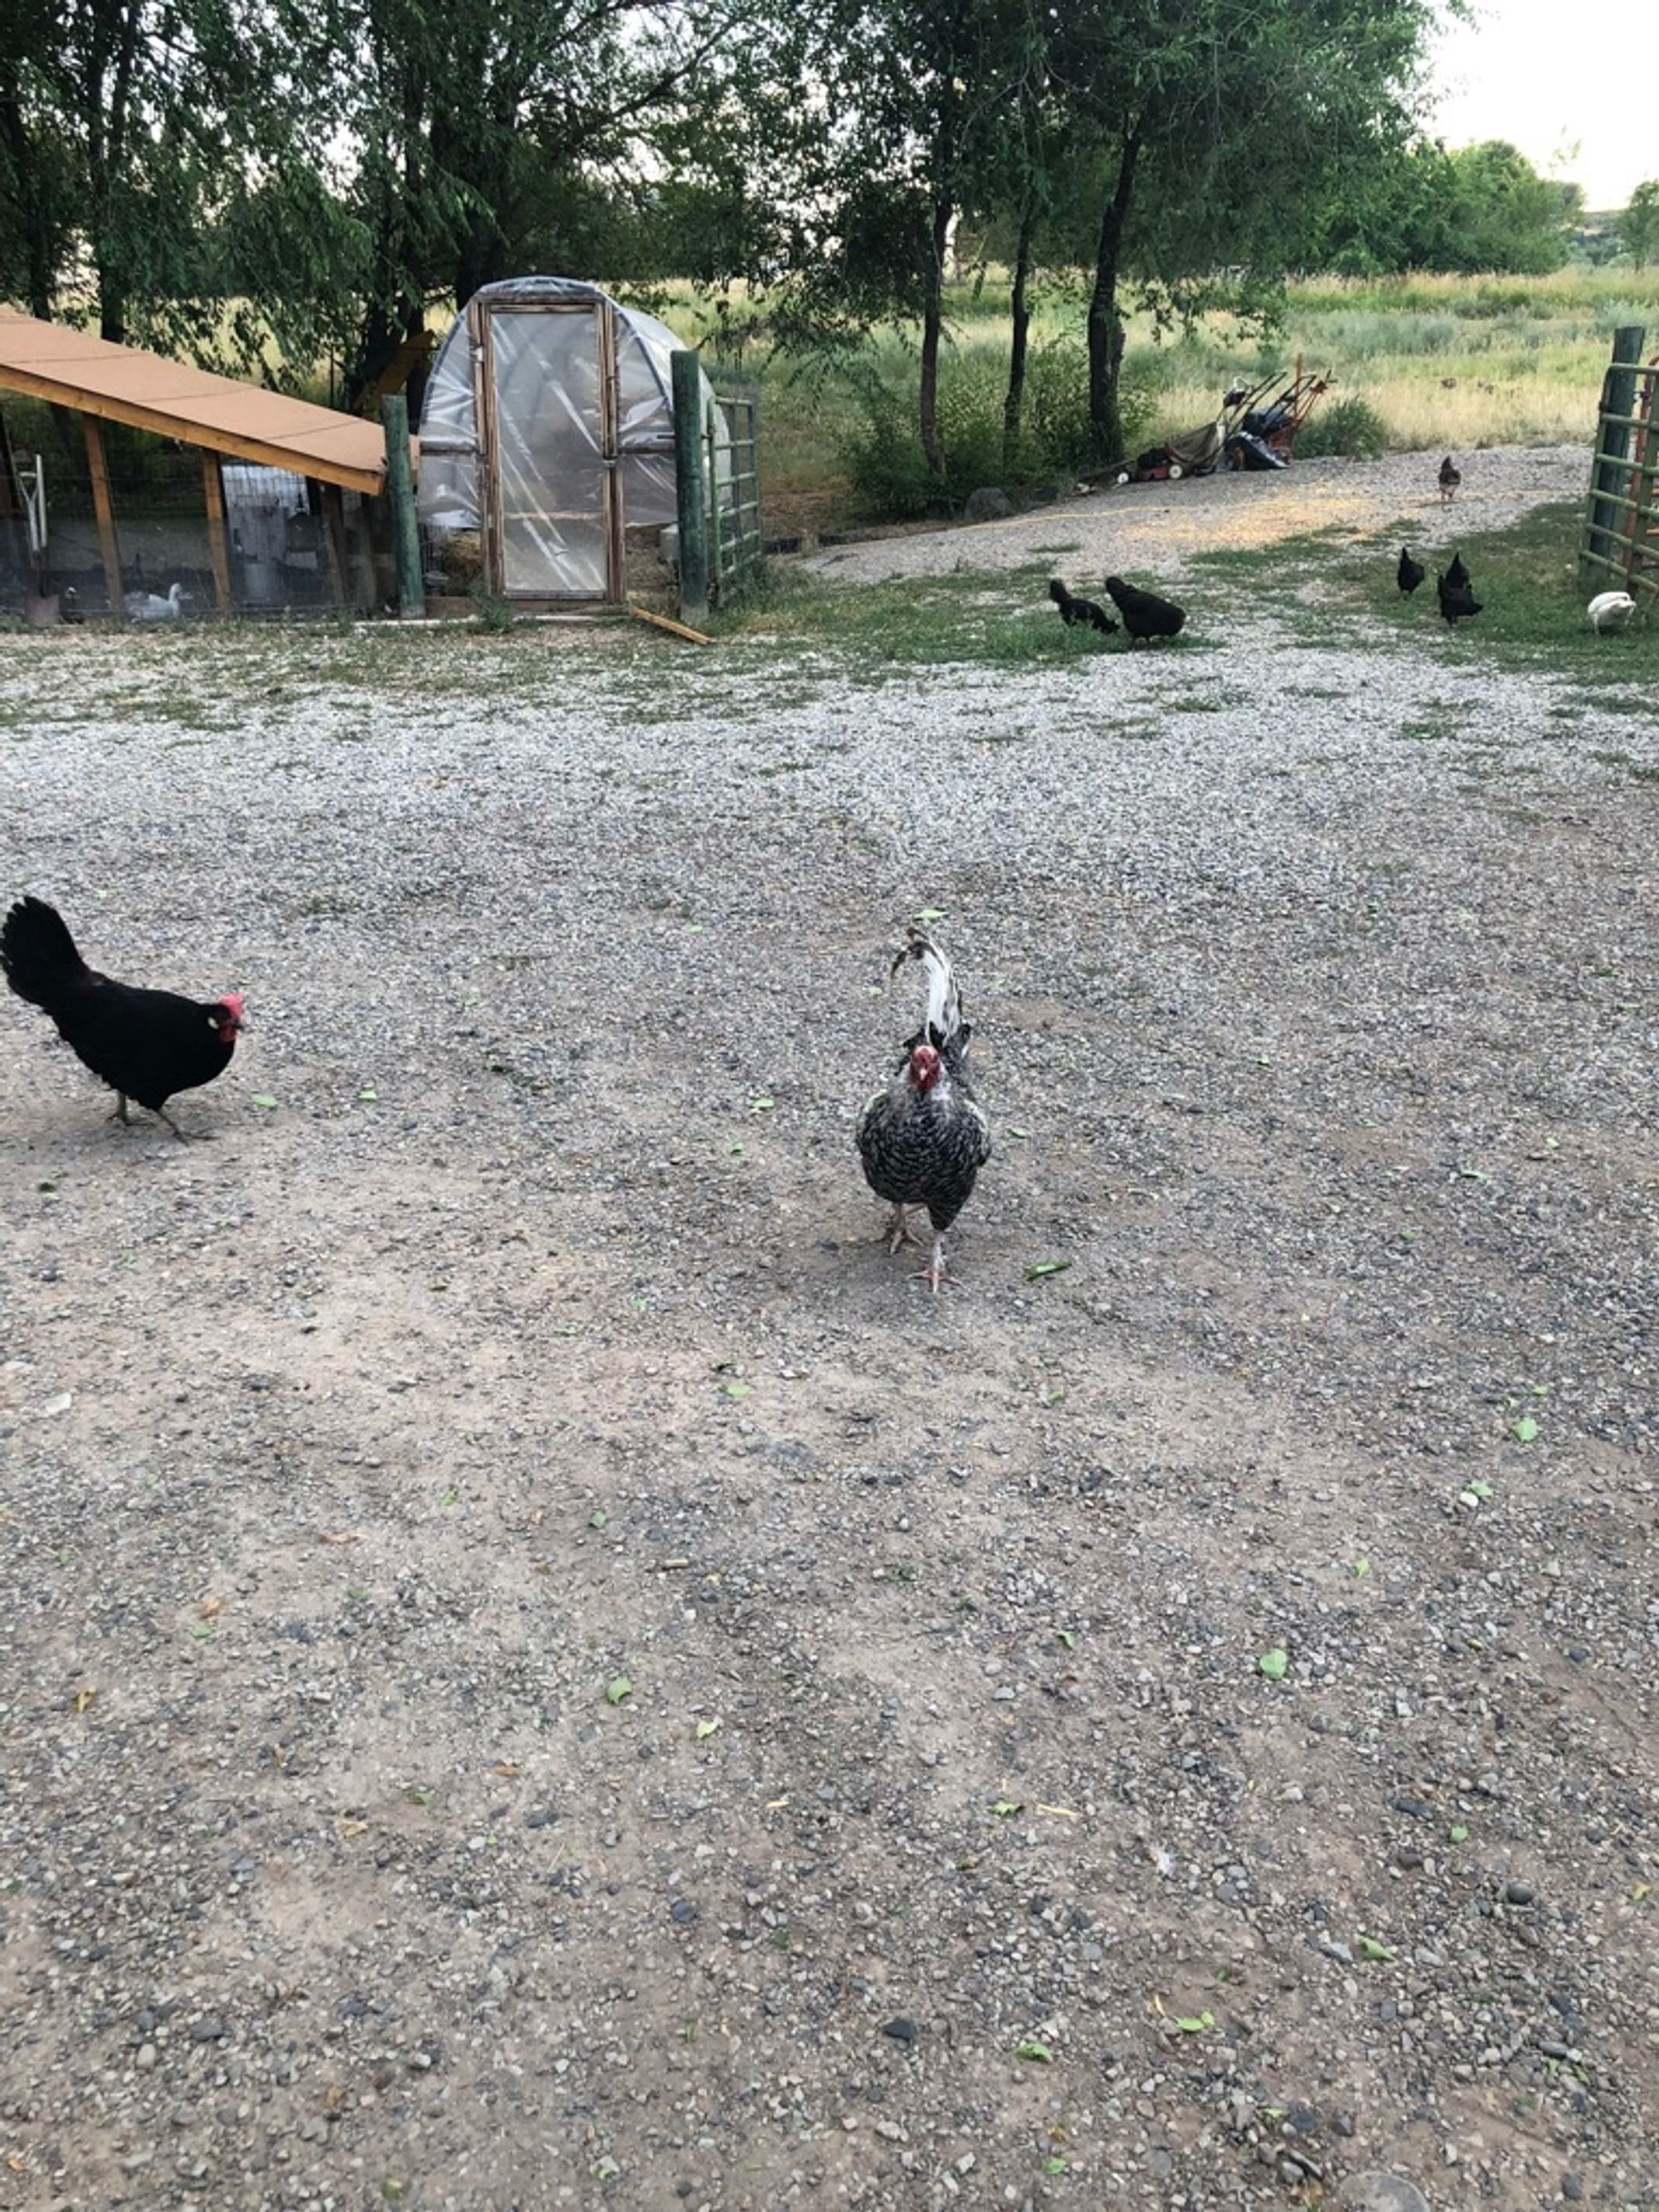 The chicken that tried to fight me